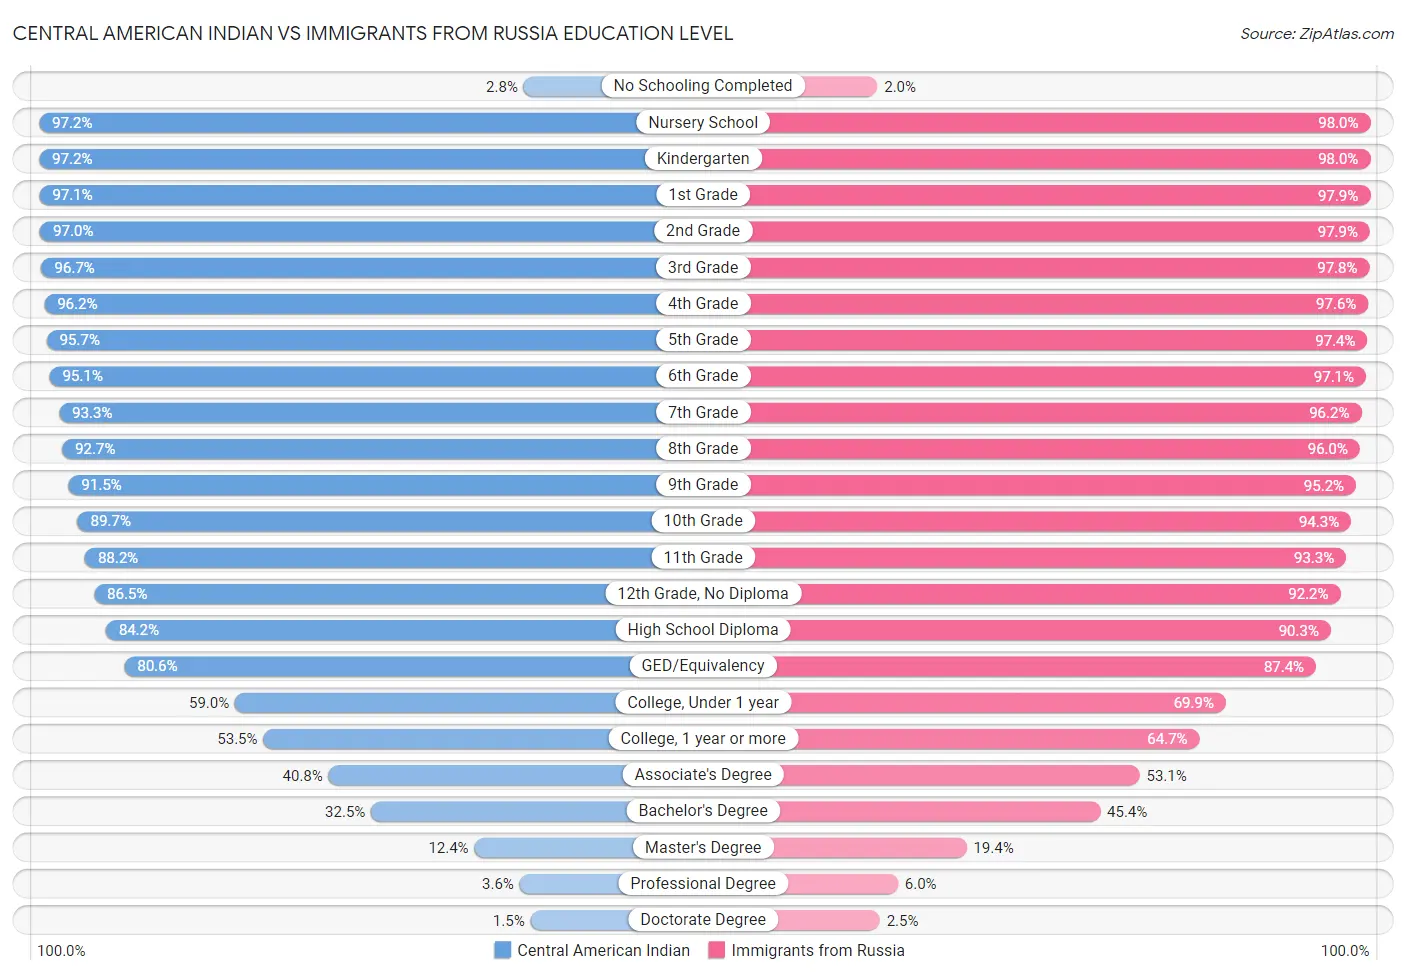 Central American Indian vs Immigrants from Russia Education Level